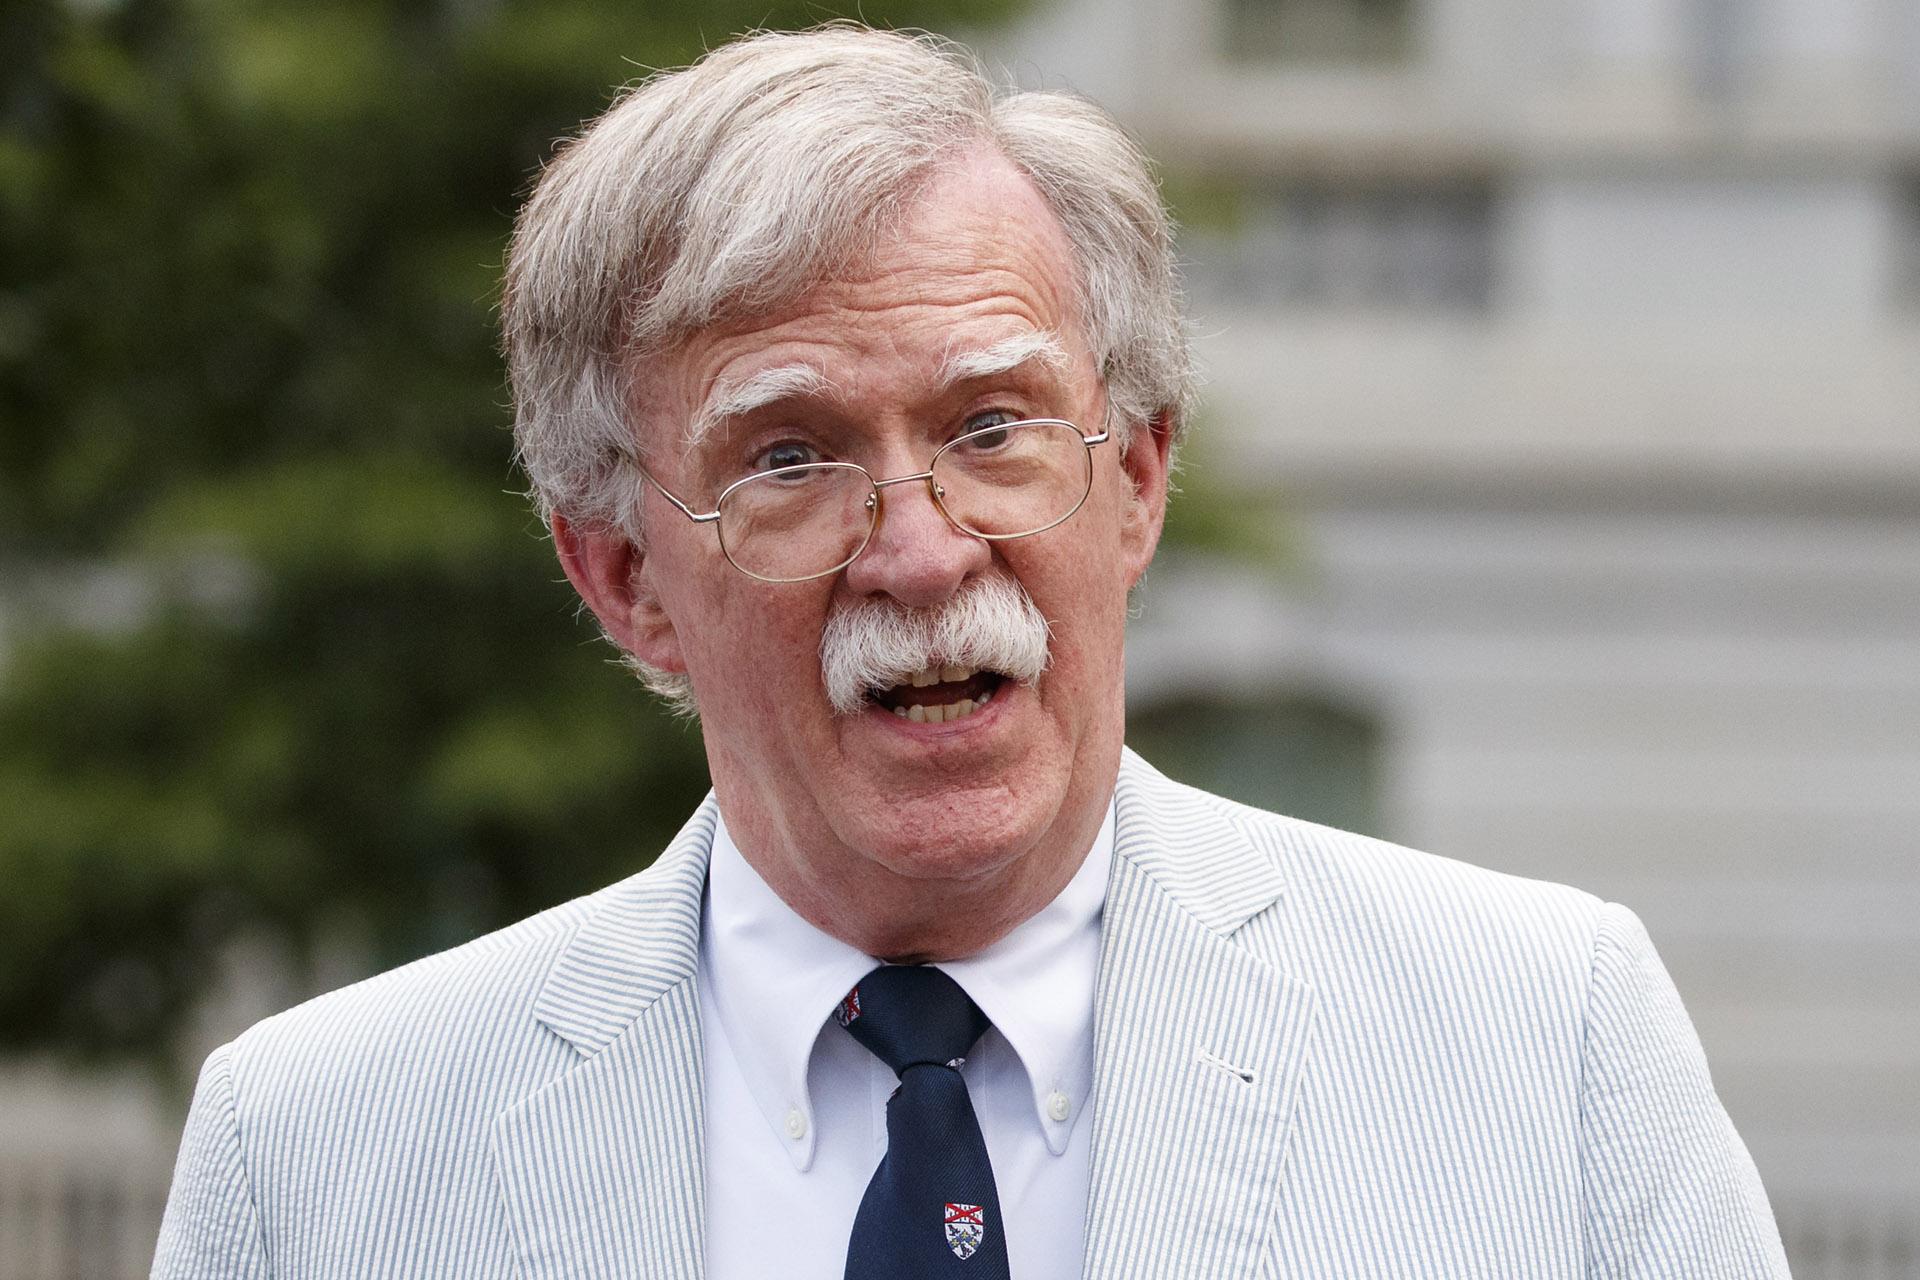 In this July 31, 2019 file photo, National security adviser John Bolton speaks to media at the White House in Washington. (AP Photo / Carolyn Kaster)